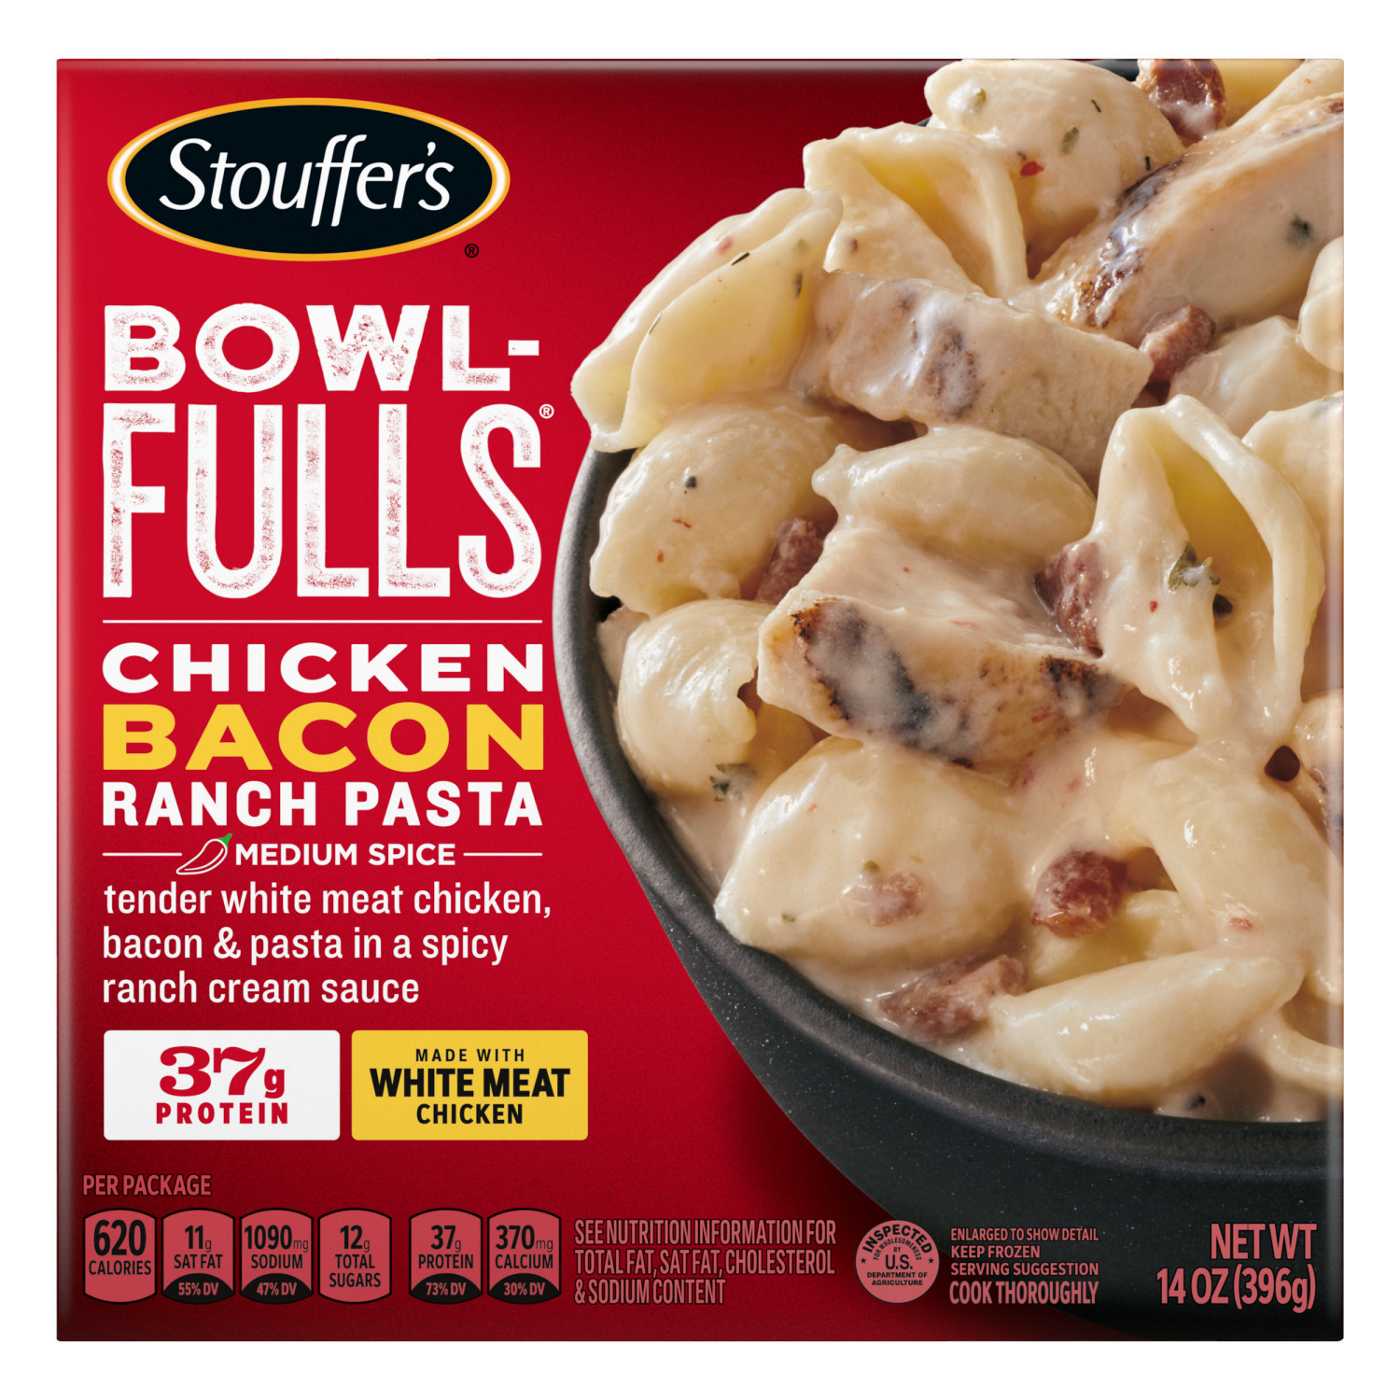 Stouffer's Bowl-Fulls Chicken Bacon Ranch Pasta Frozen Meal; image 1 of 6